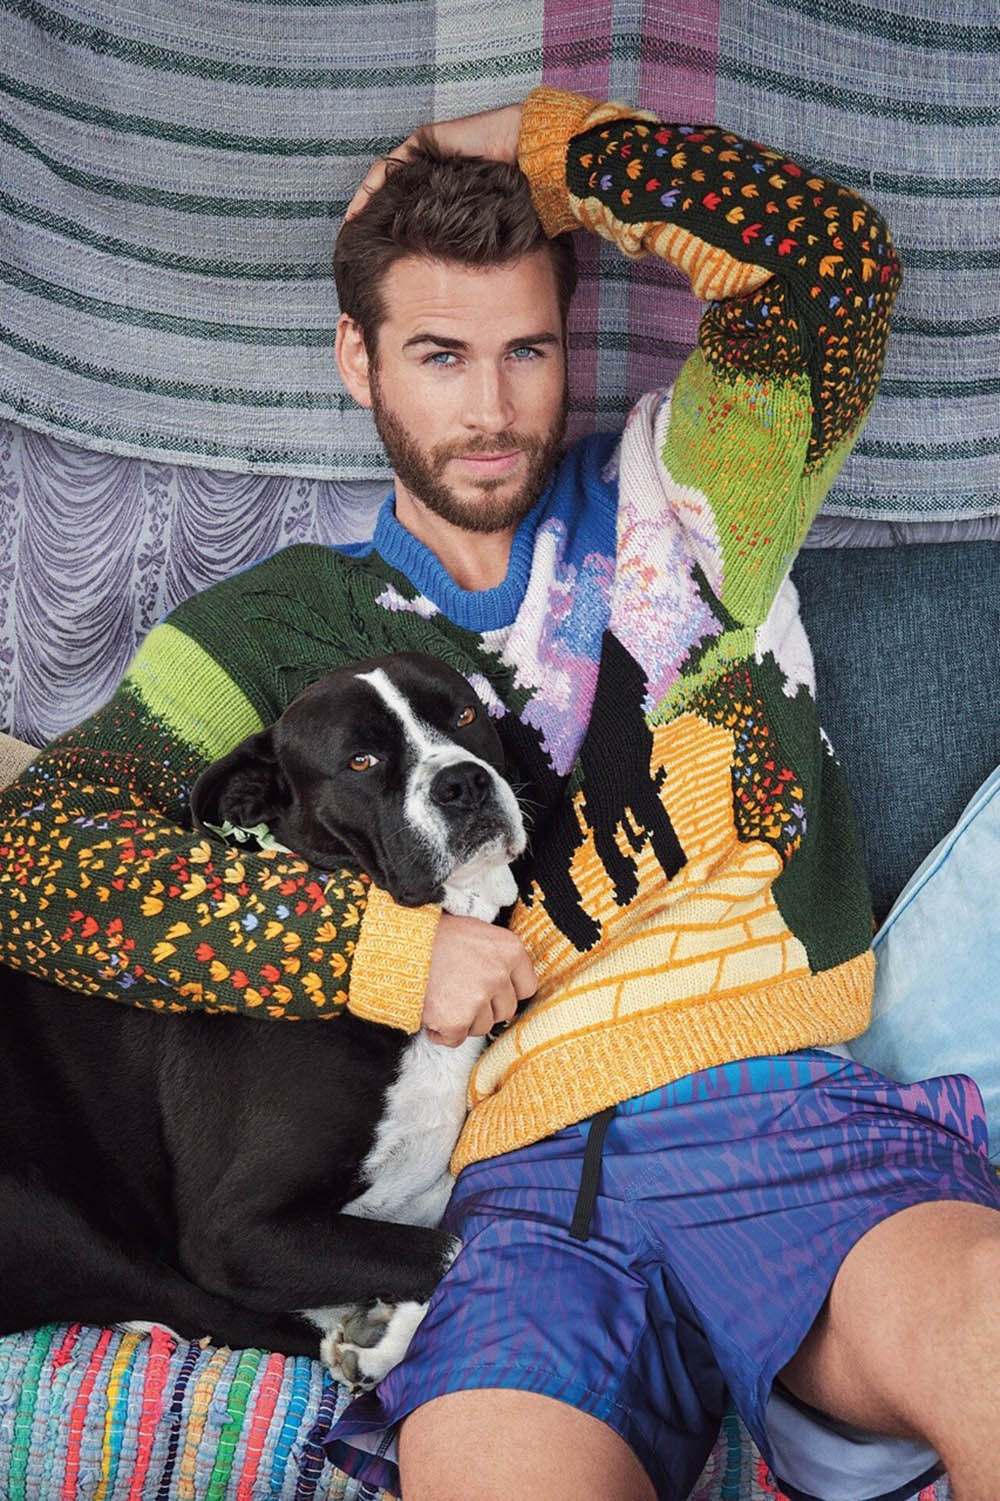 Liam Hemsworth covers GQ Australia May June 2019 by Carter Smith